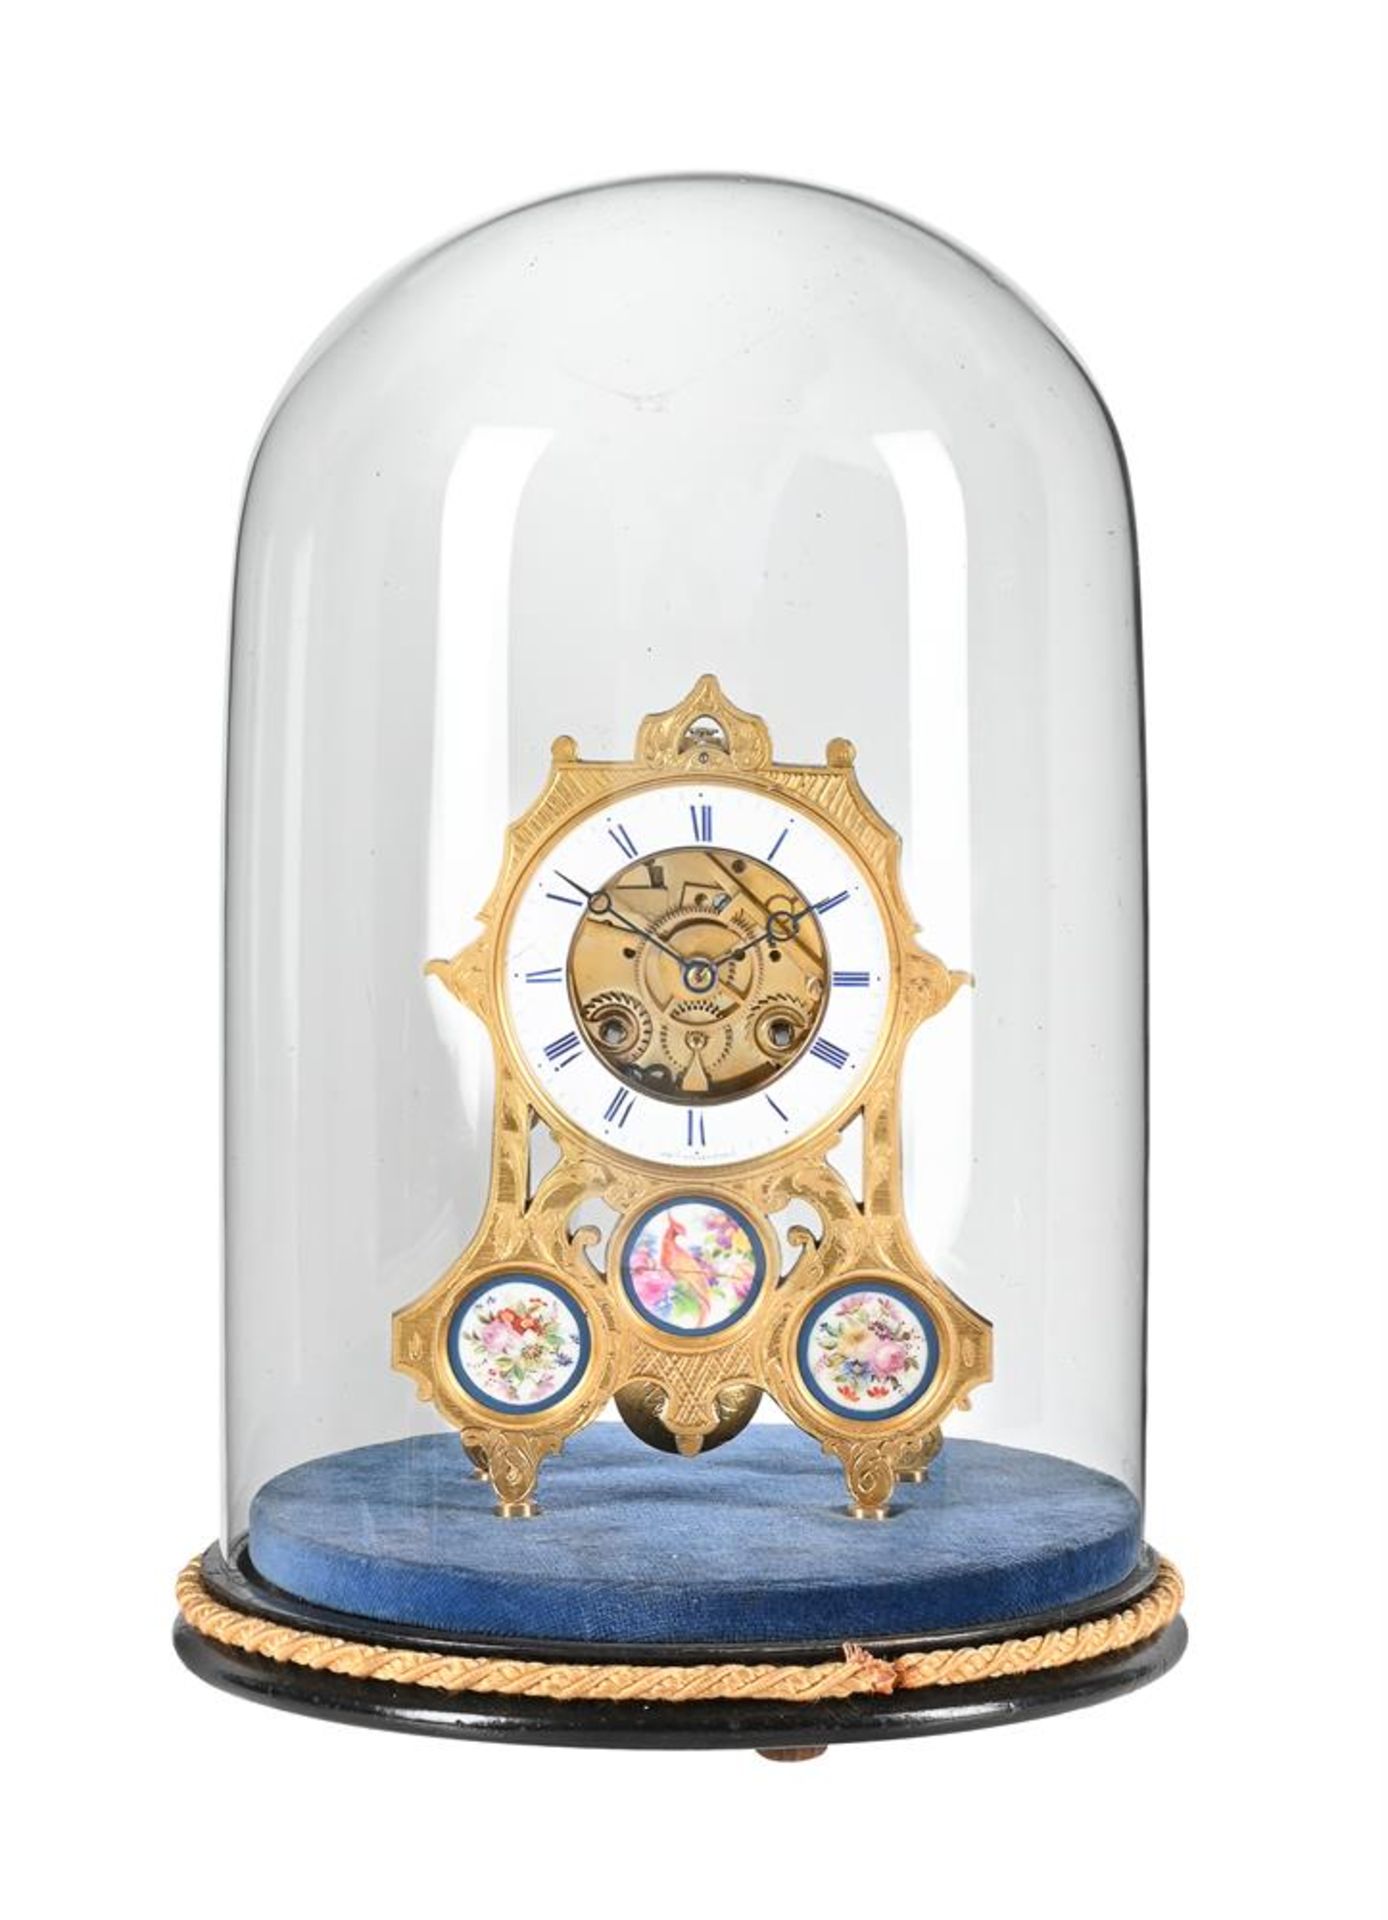 A FRENCH LOUIS PHILIPPE SEVRES-STYLE PORCELAIN INSET ENGRAVED GILT BRASS MANTEL CLOCK - Image 4 of 4